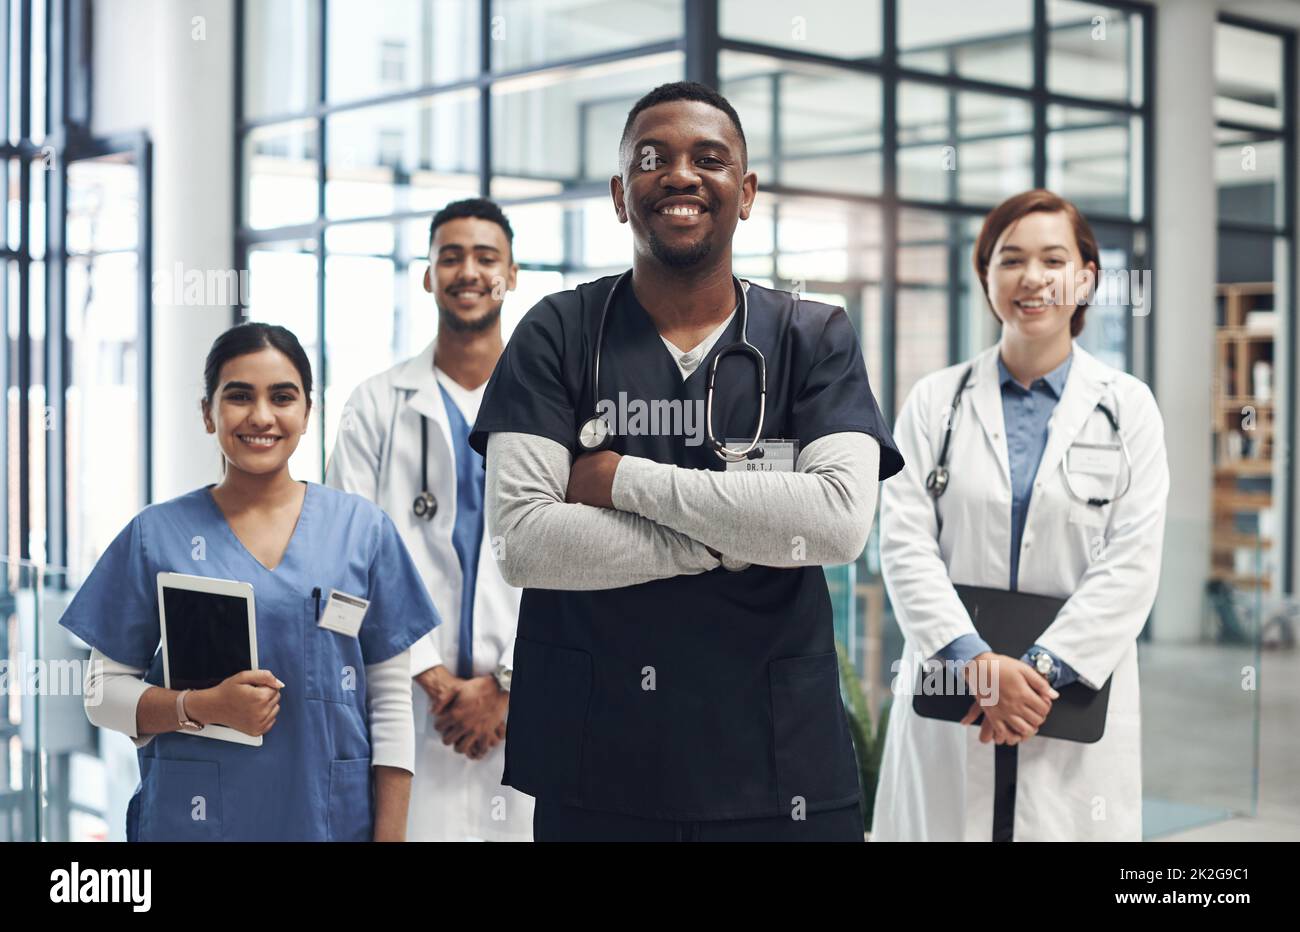 Were always proud to help those in need. Shot of medical staff together at work. Stock Photo